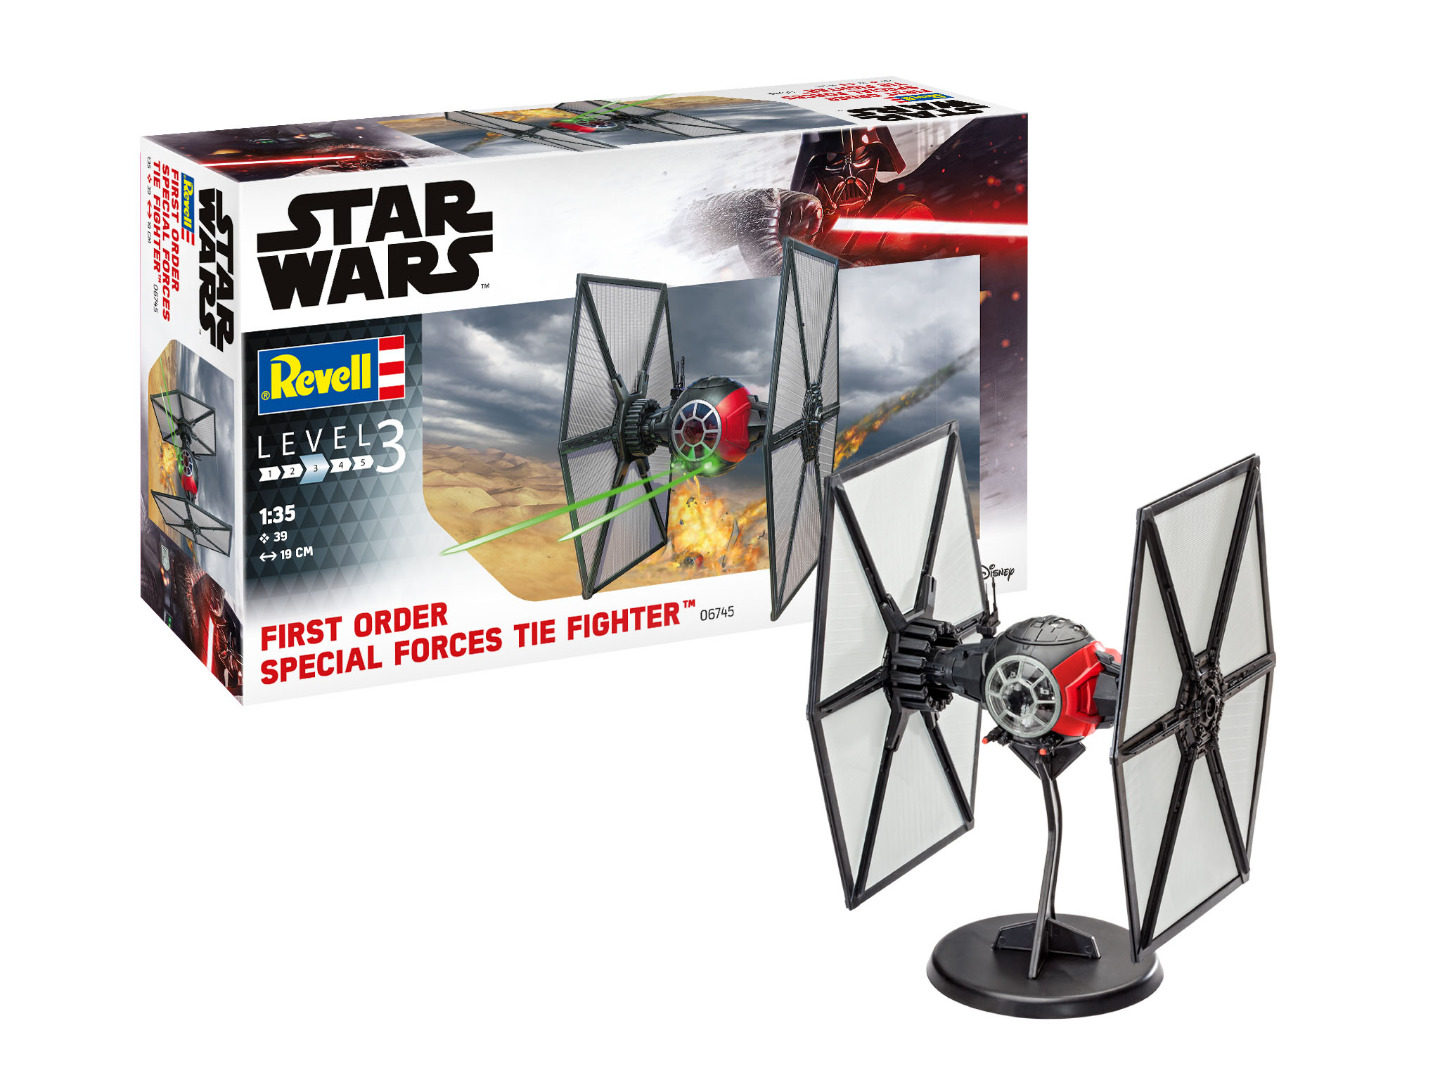 Revell Model Kit First Order Special Forces TIE Fighter Scale 1:35